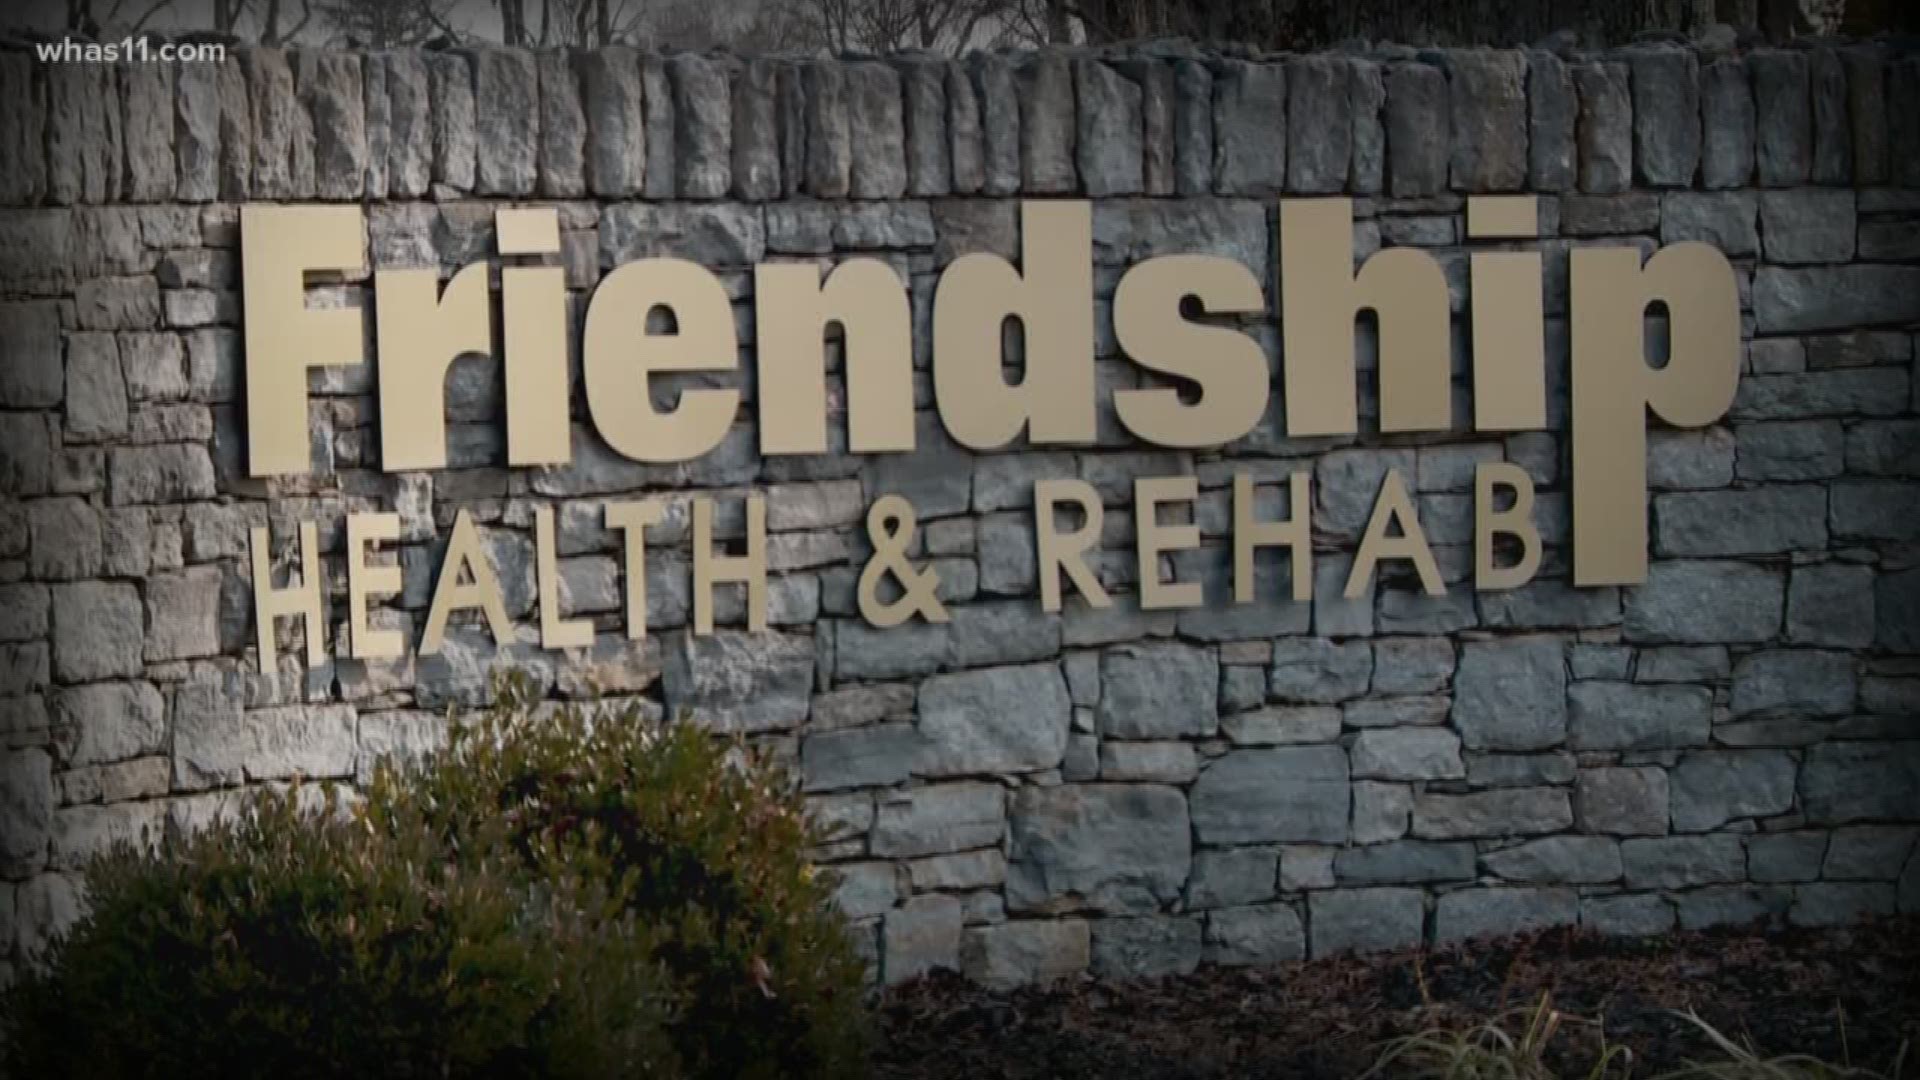 More women have come forward with allegations against a former Friendship Health and Rehab employee.